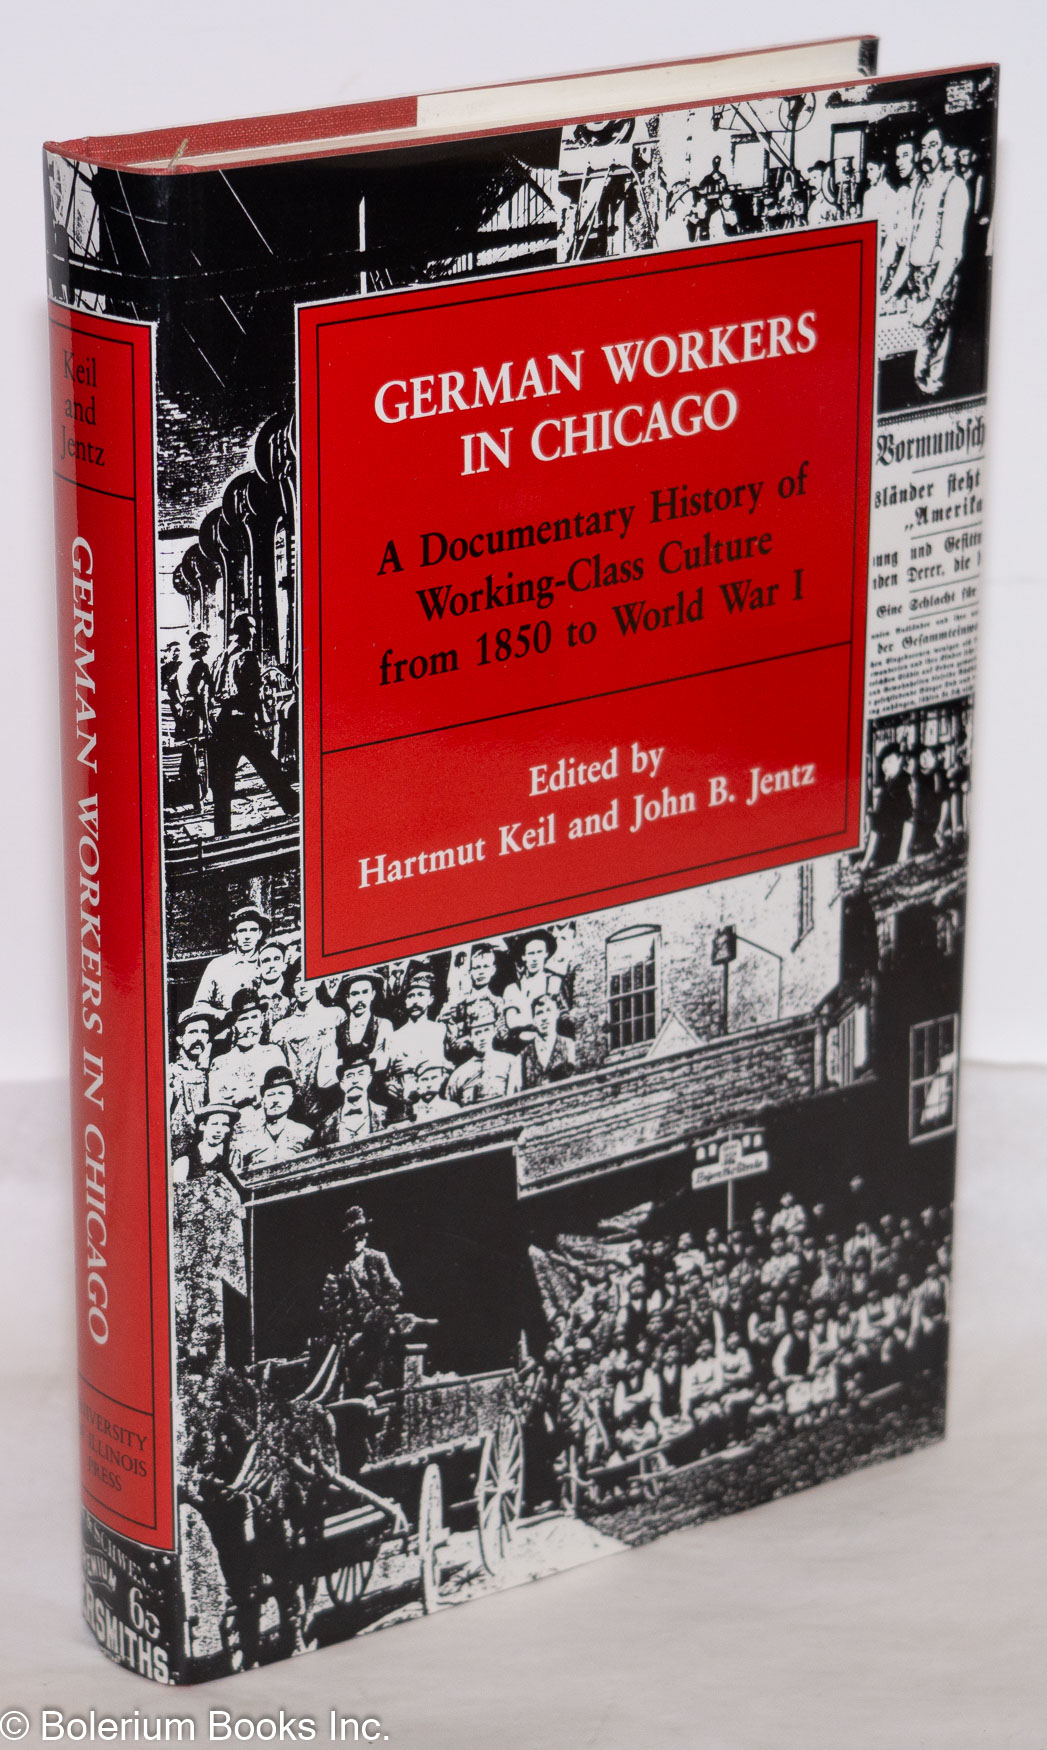 German workers in Chicago: a documentary history of working-class culture from 1850 to World War I. - Keil, Hartmut and John B. Jentz, editors